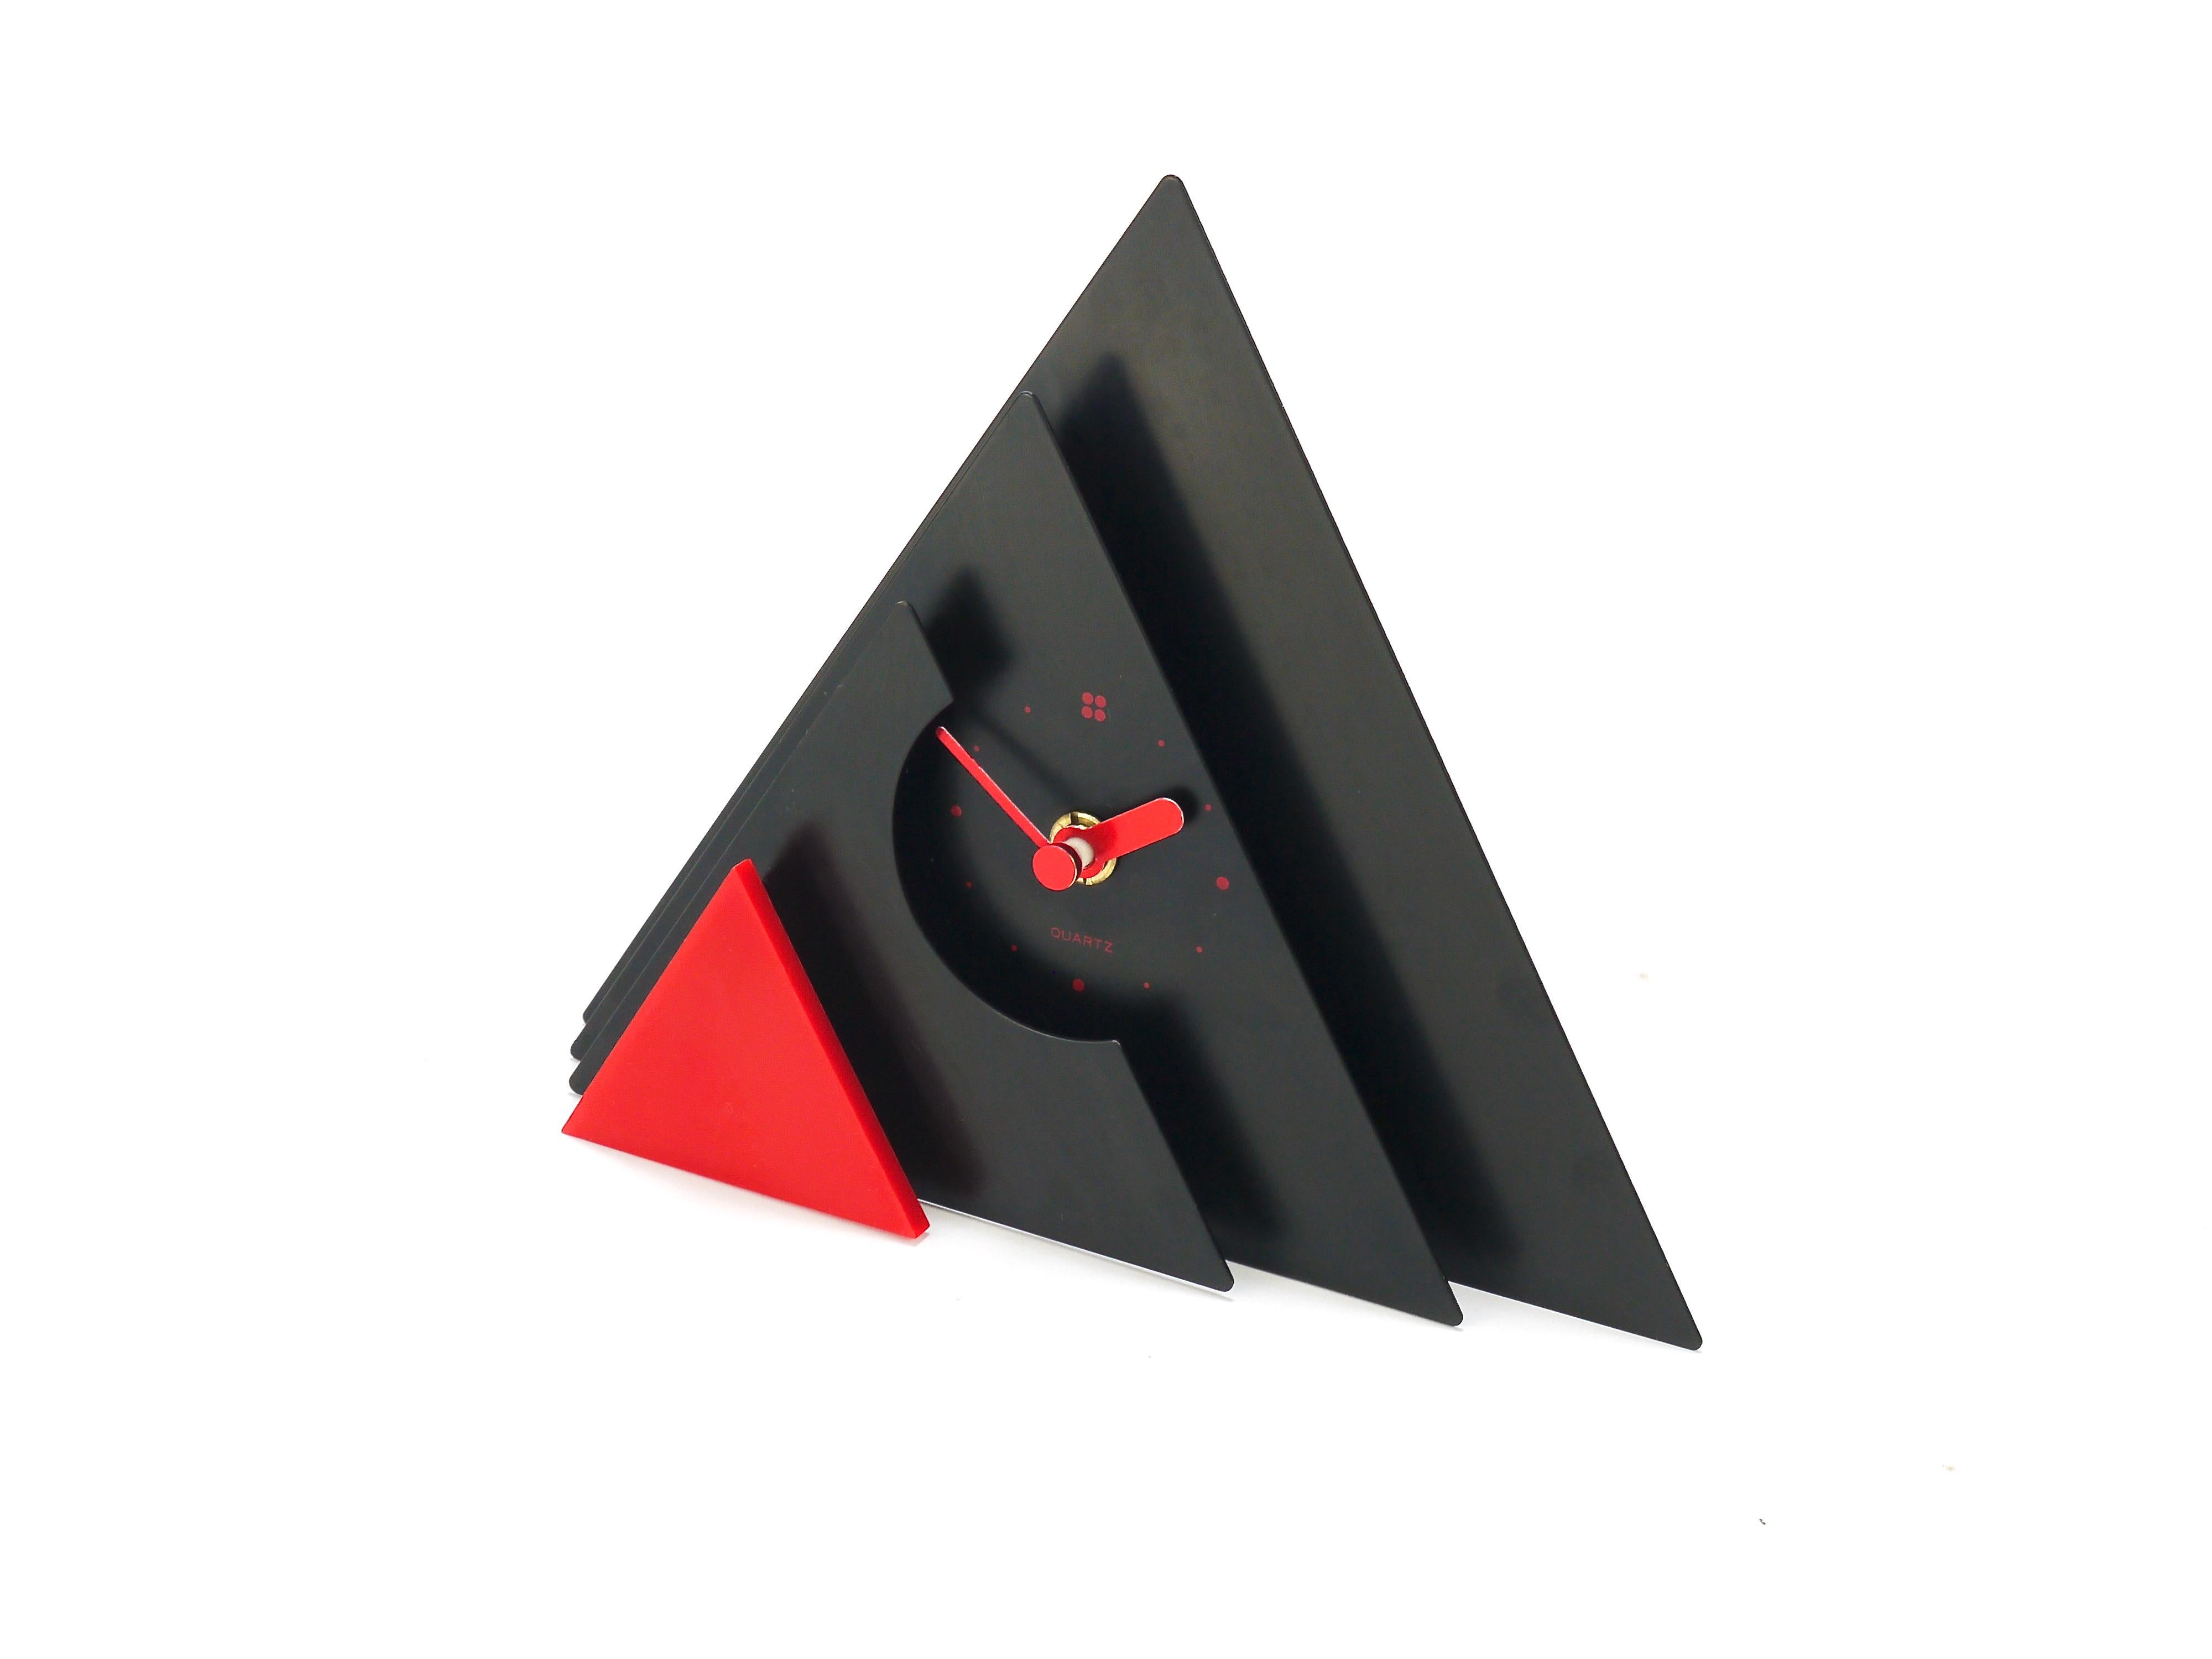 Late 20th Century Postmodern Pyramid Desk or Table Clock by Makiko Taniguchi, Japan, 1980s For Sale